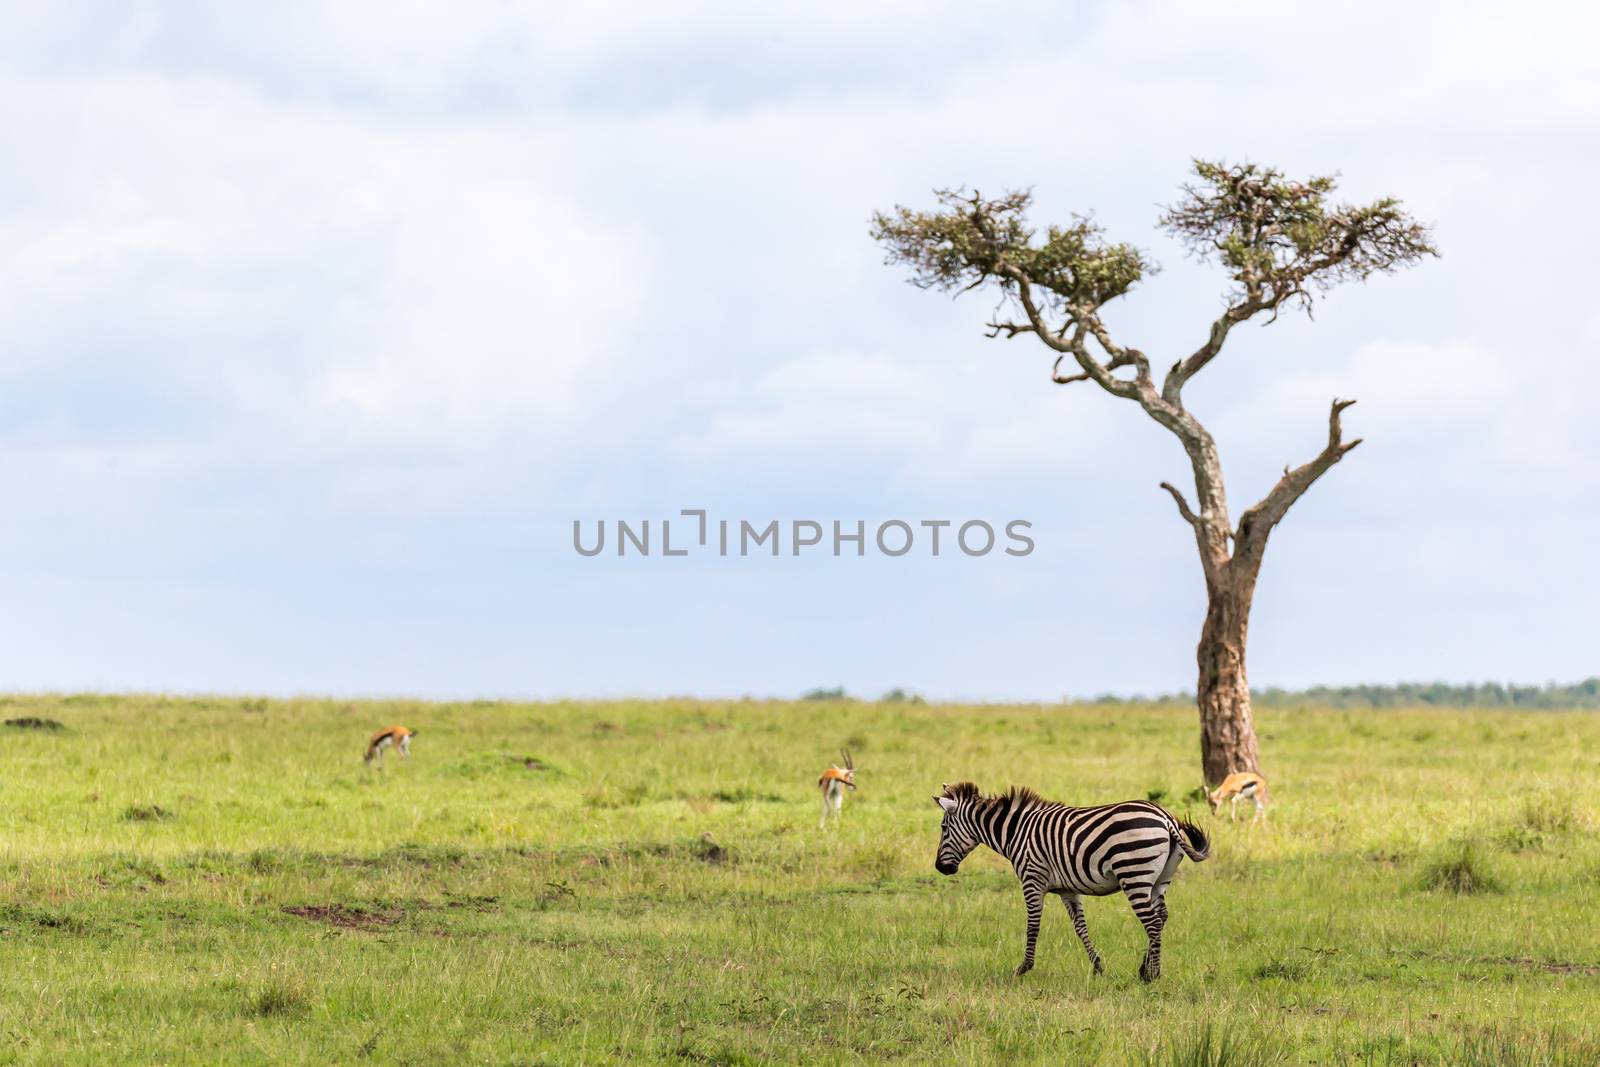 A Zebra family grazes in the savanna in close proximity to other by 25ehaag6